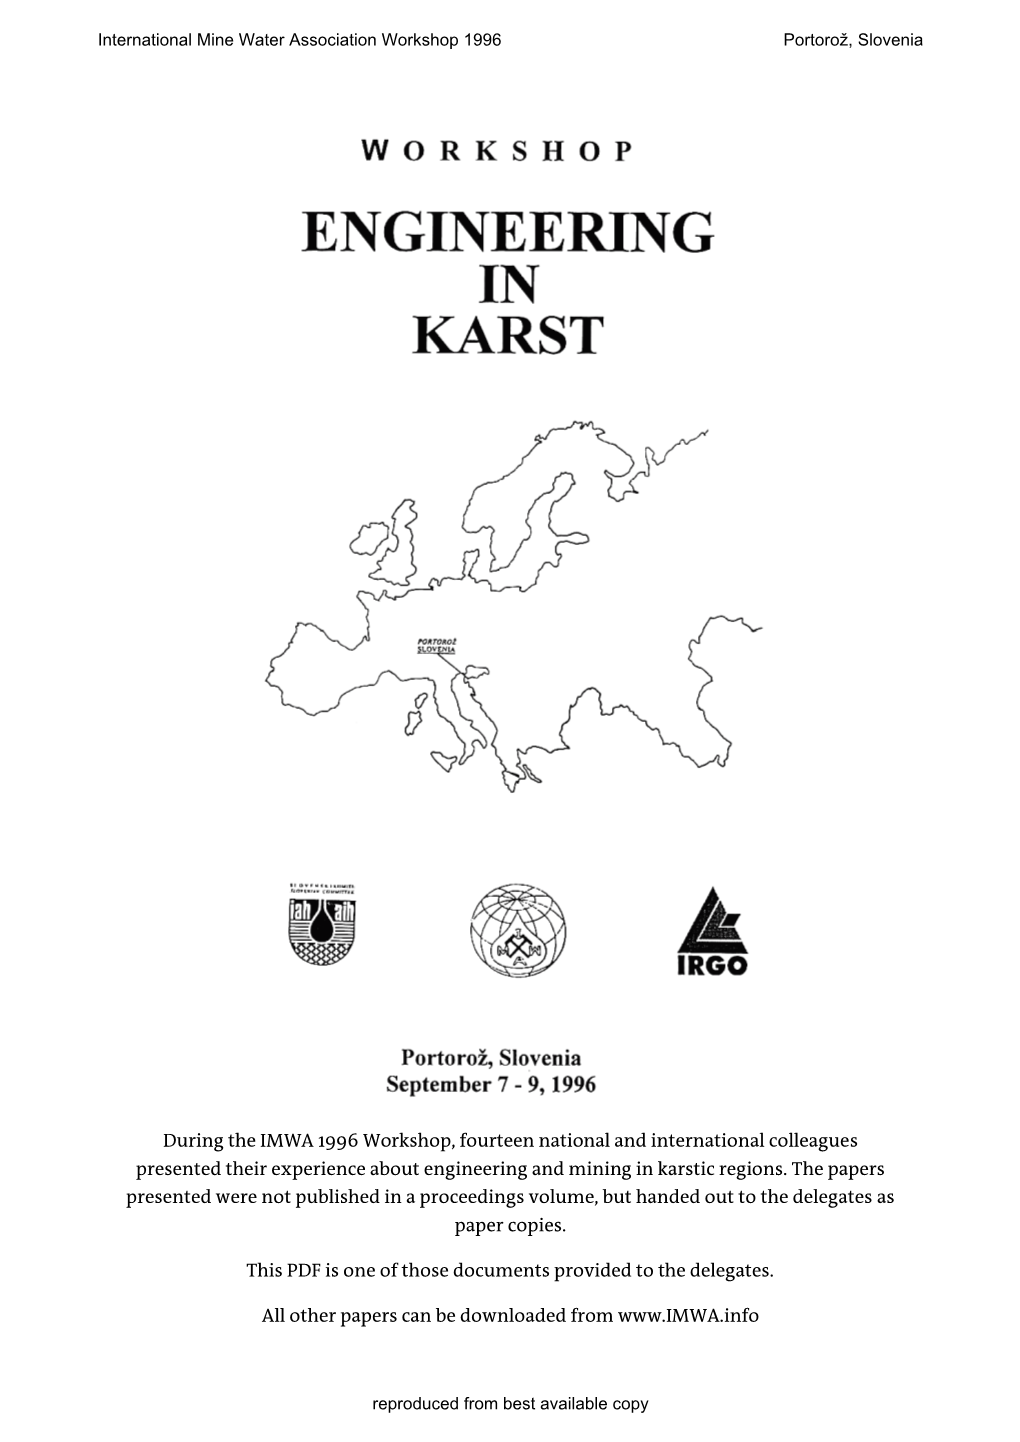 During the IMWA 1996 Workshop, Fourteen National and International Colleagues Presented Their Experience About Engineering and Mining in Karstic Regions